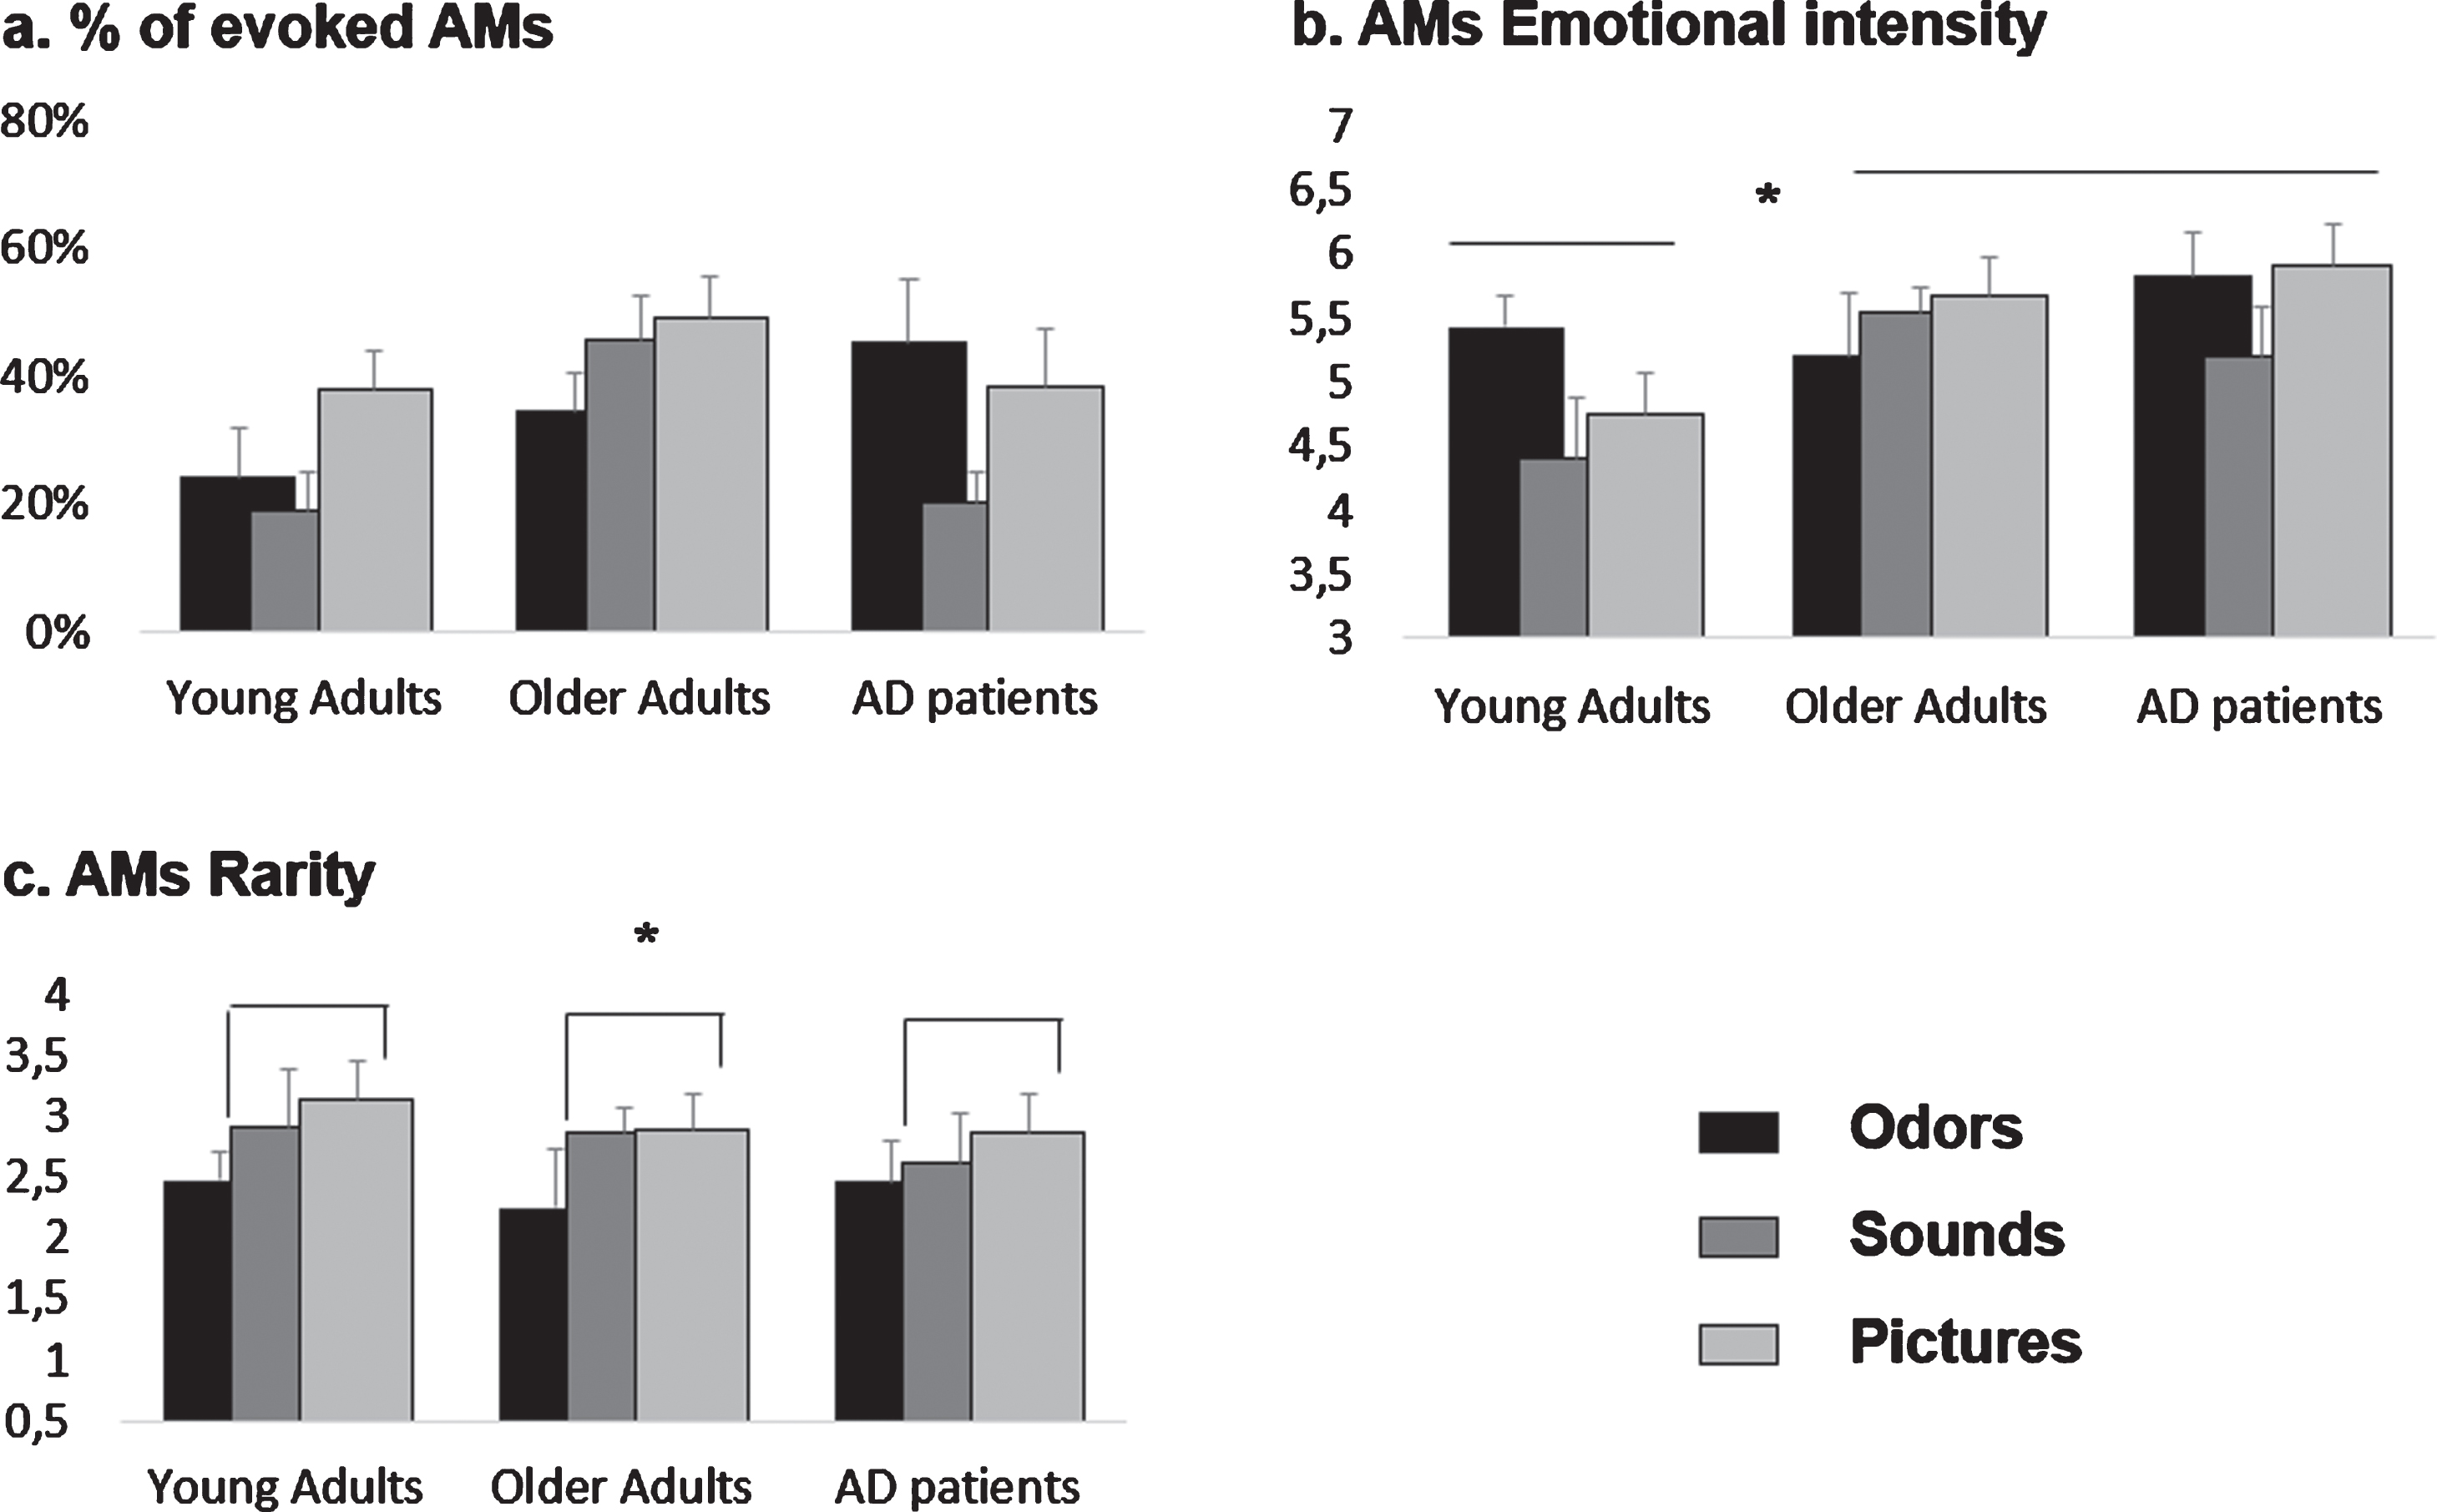 Effects of olfactory, auditory and visual cueing on AM characteristics for young adults (YA), older adults (OA), and AD patients. Means and standard errors of the mean are reported. a) %of evoked AMs. These data were analyzed categorically by computing Fisher’s exact test. Significant effects are described in Table 3. b) AMs emotional intensity. Both AD patients and OA rated their memories as more emotional than YA, (c) AMs rarity. Overall, pictures-evoked memories were significantly rarer than odors-evoked ones.